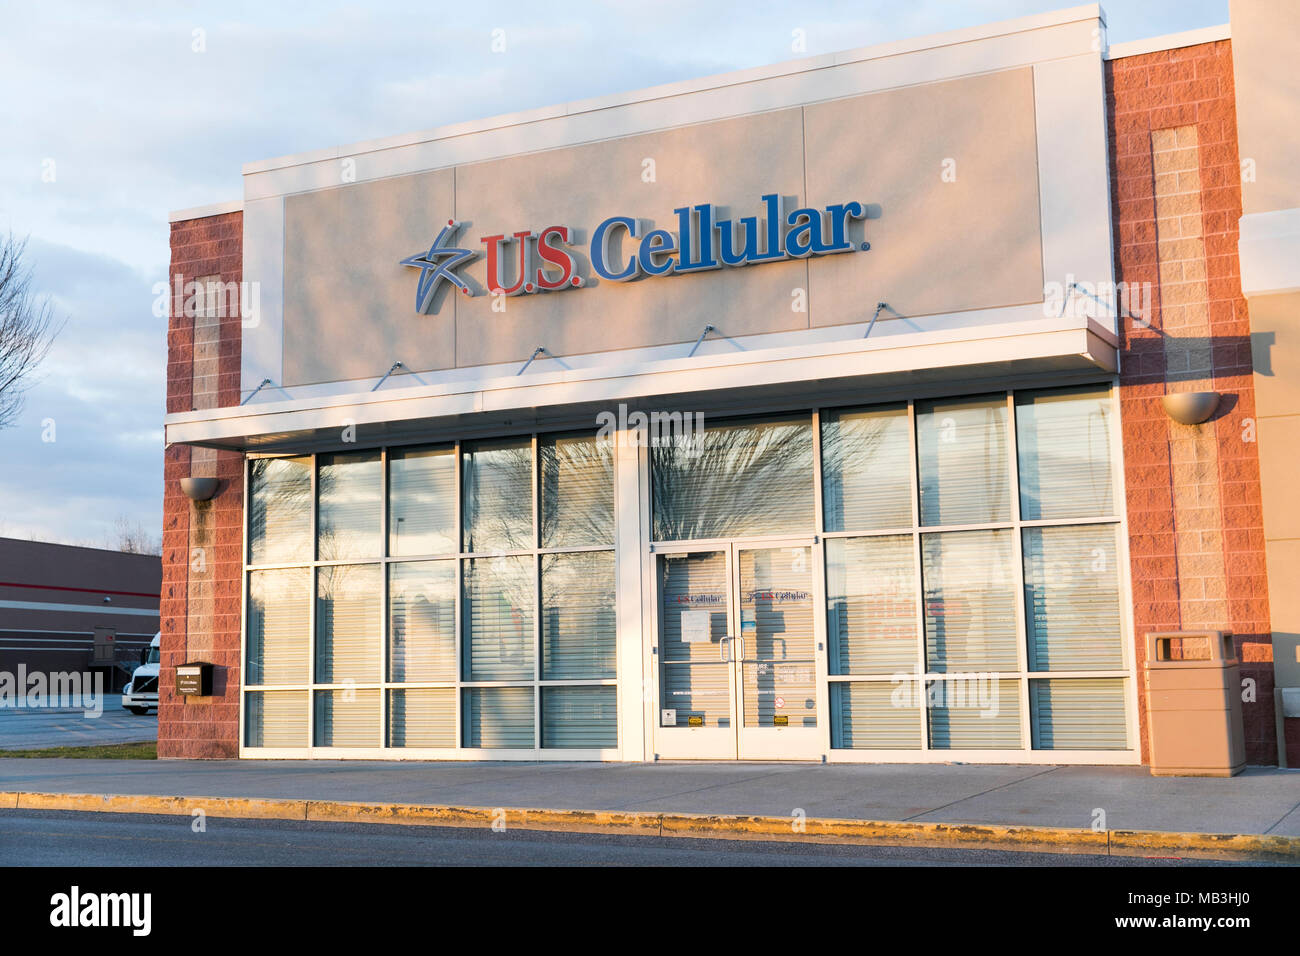 A U.S. Cellular logo seen on a retail store front in Hagerstown, Maryland on April 5, 2018. Stock Photo